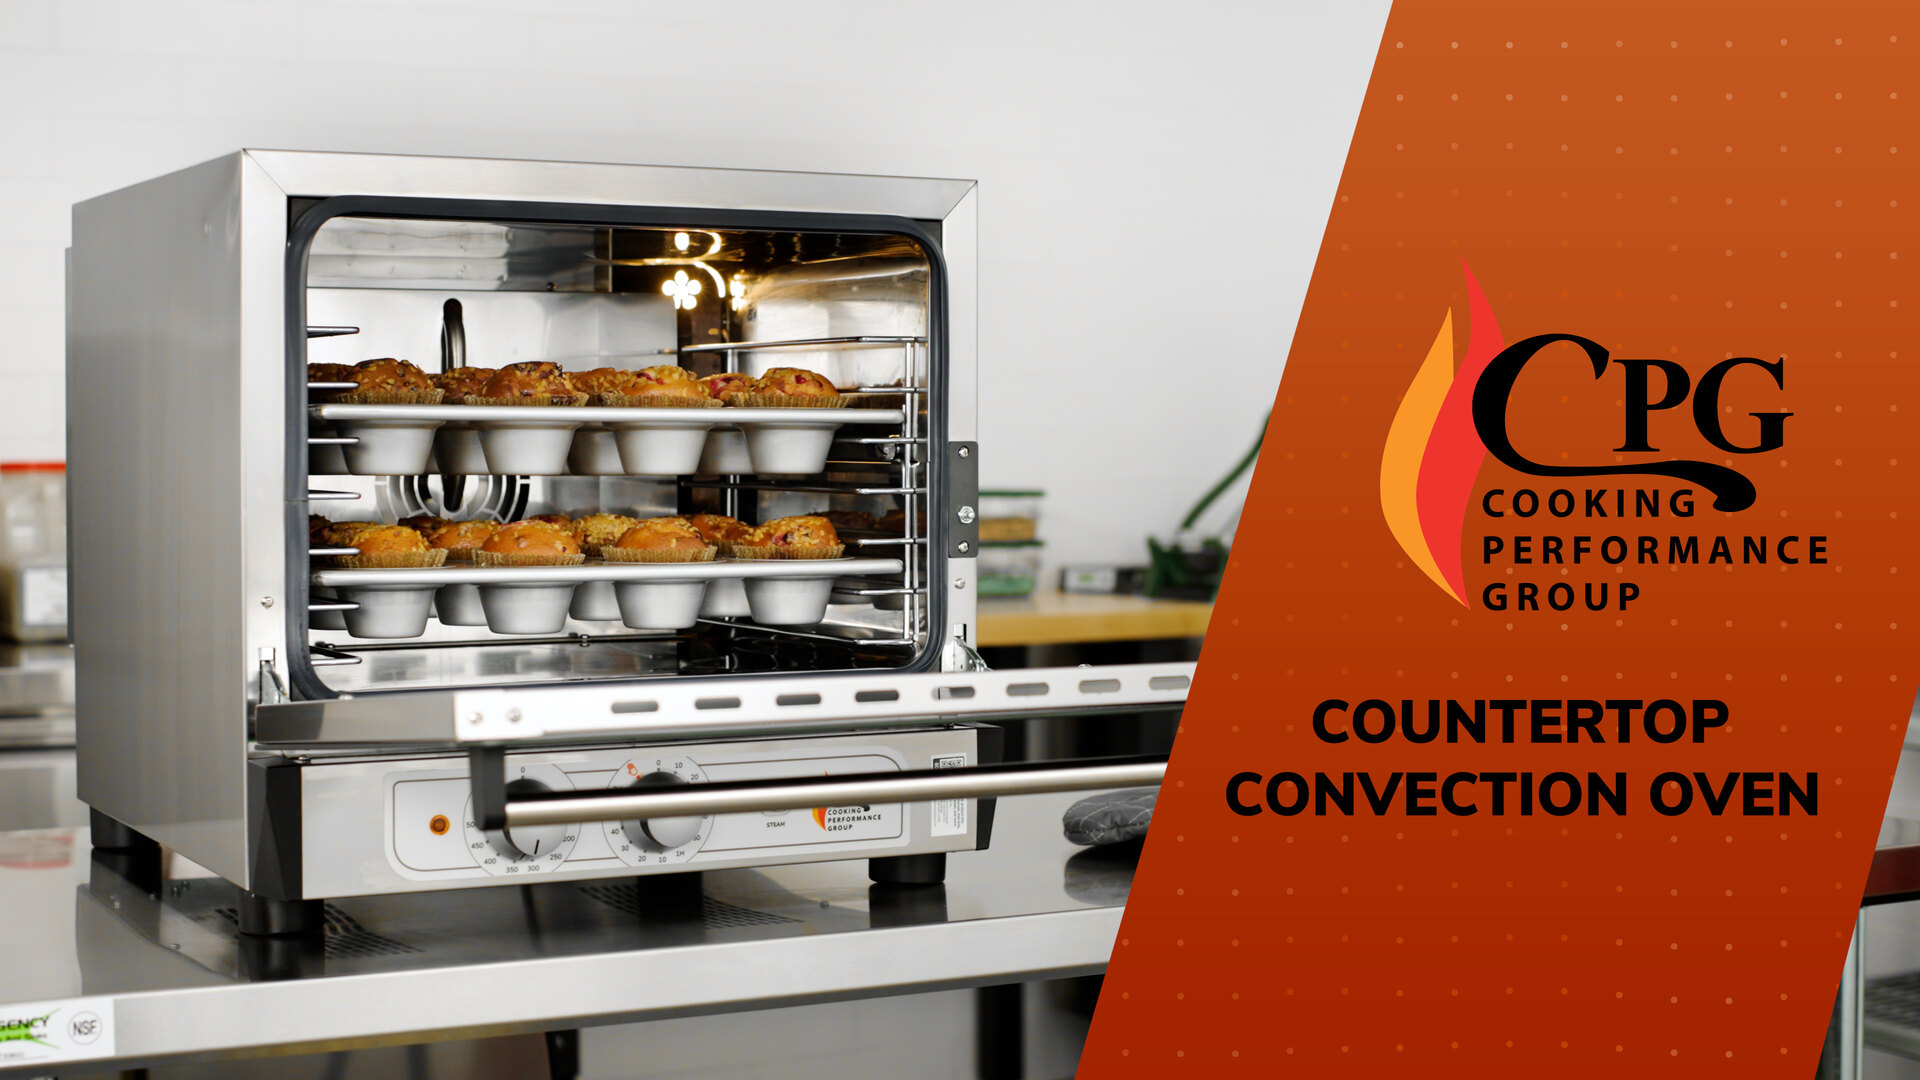 https://cdn.webstaurantstore.com/images/videos/extra_large/cpg_countertop_convection_oven_product.jpg